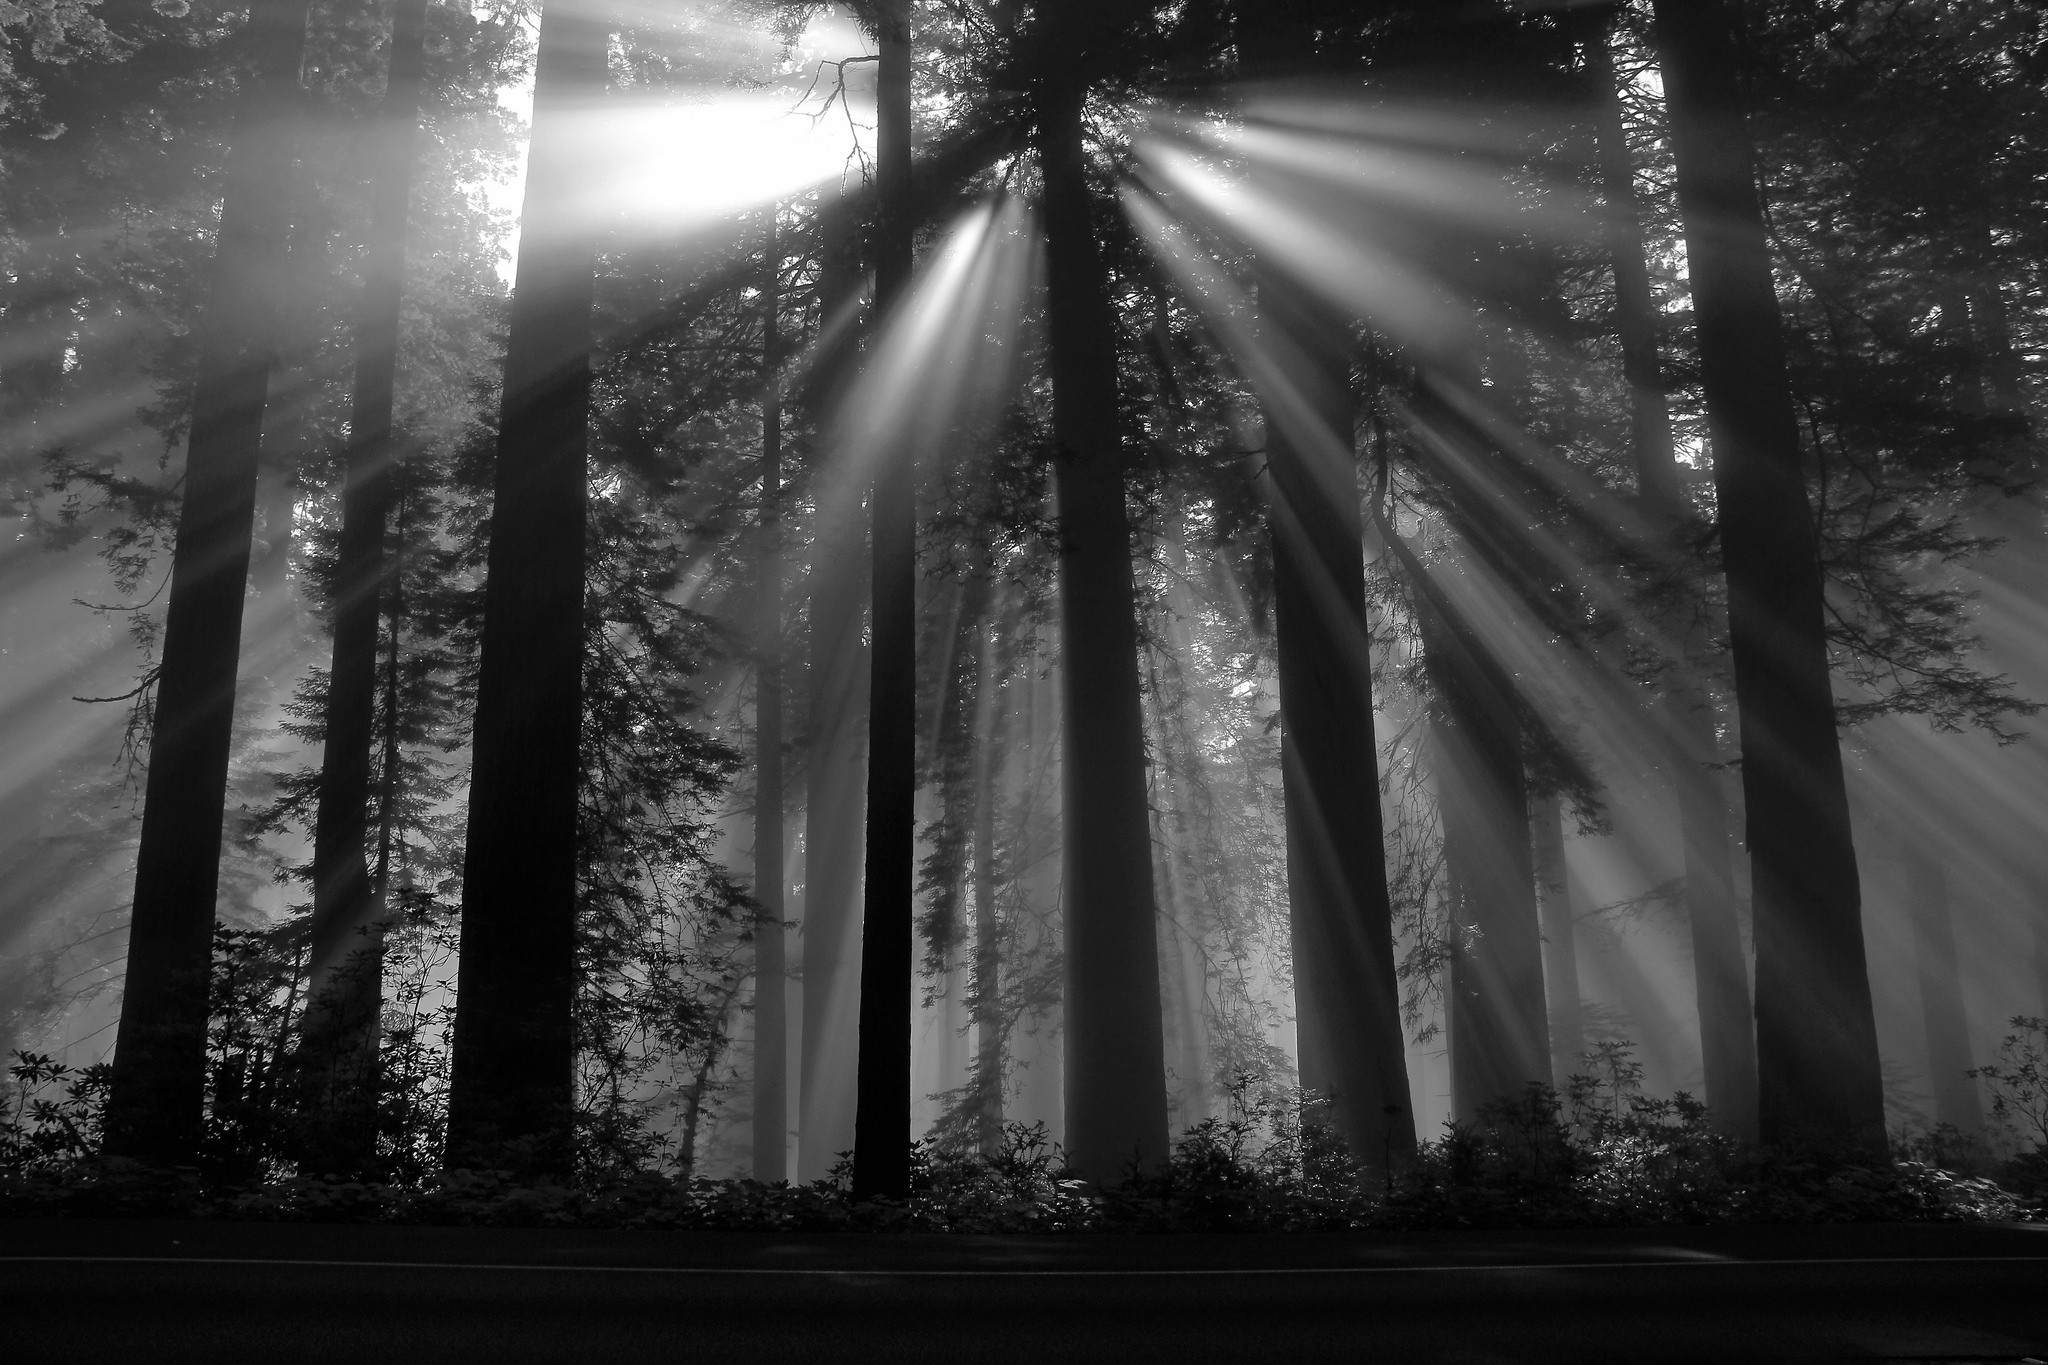 General 2048x1365 photography nature sun rays dark plants trees monochrome deep forest forest